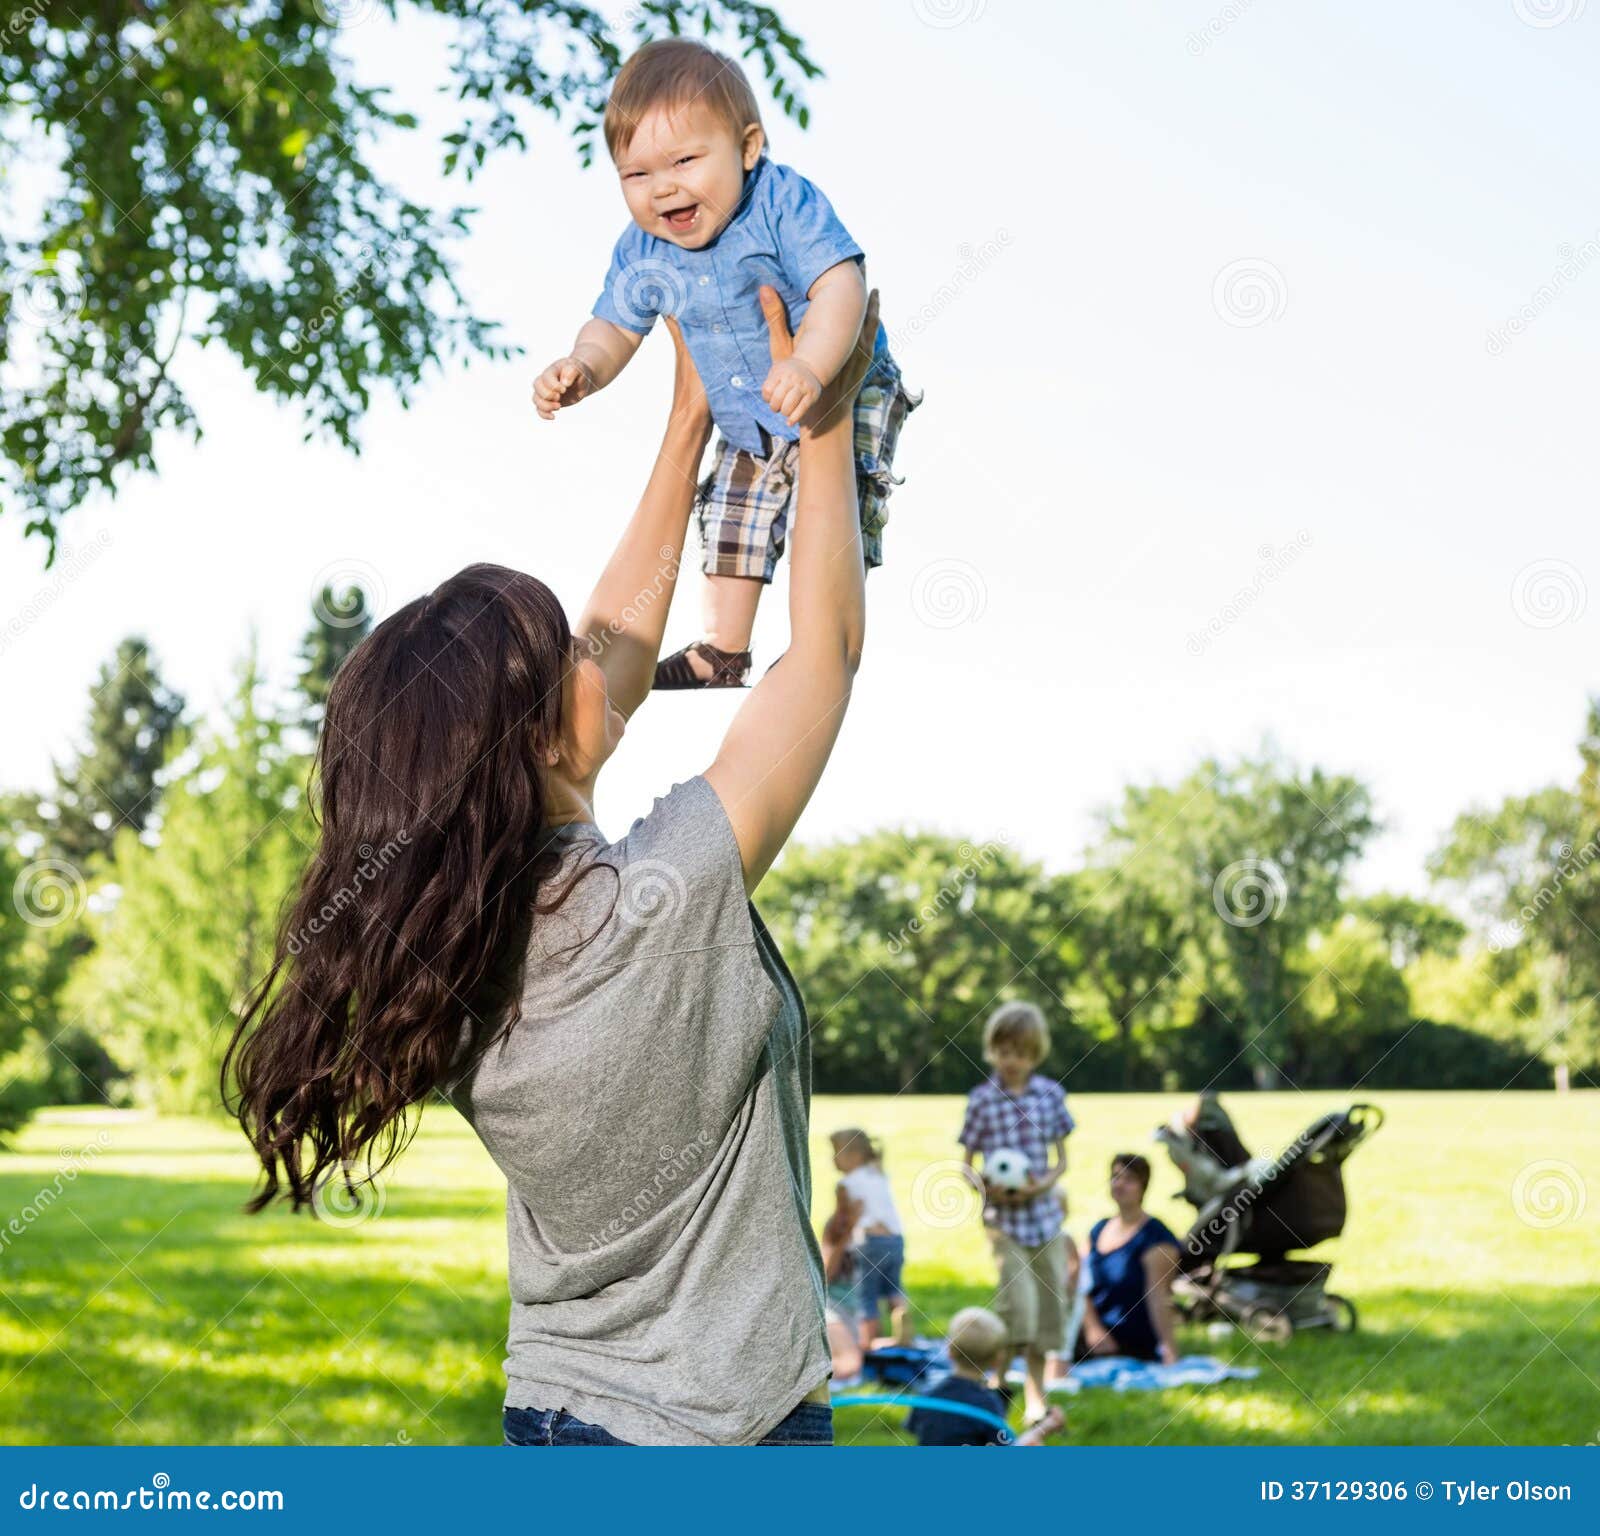 Playful Mother Lifting Baby Boy In Park Stock Photo ...